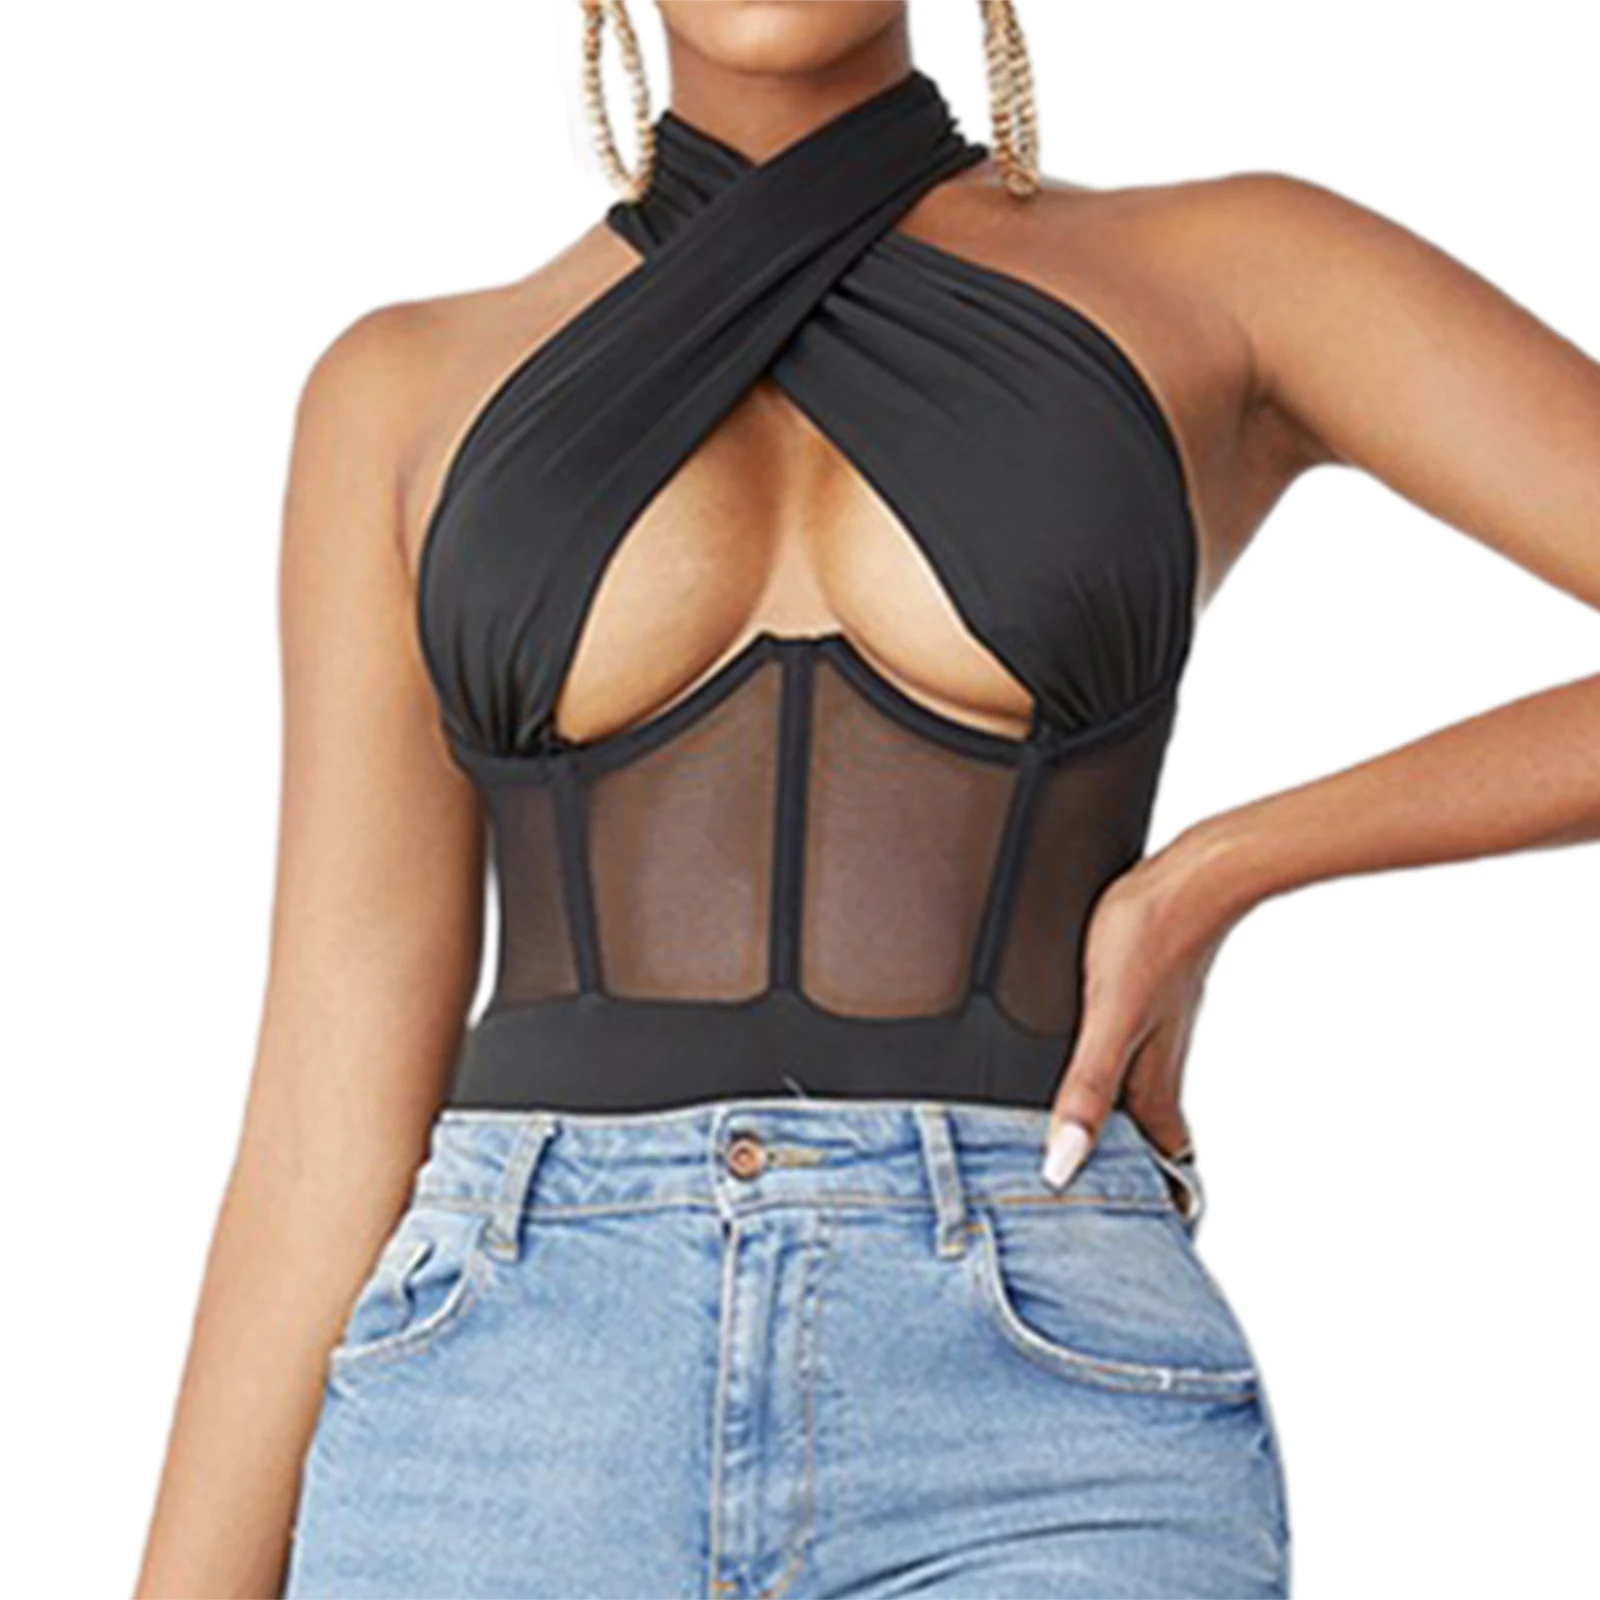 bikini cover up skirt Women Sexy Hollow Out Bodysuit,Black Solid Color Halter Neck Backless Wrapped Chest Stitching Mesh Slim Bodysuit,S/ M/ L bathing suit wrap skirt